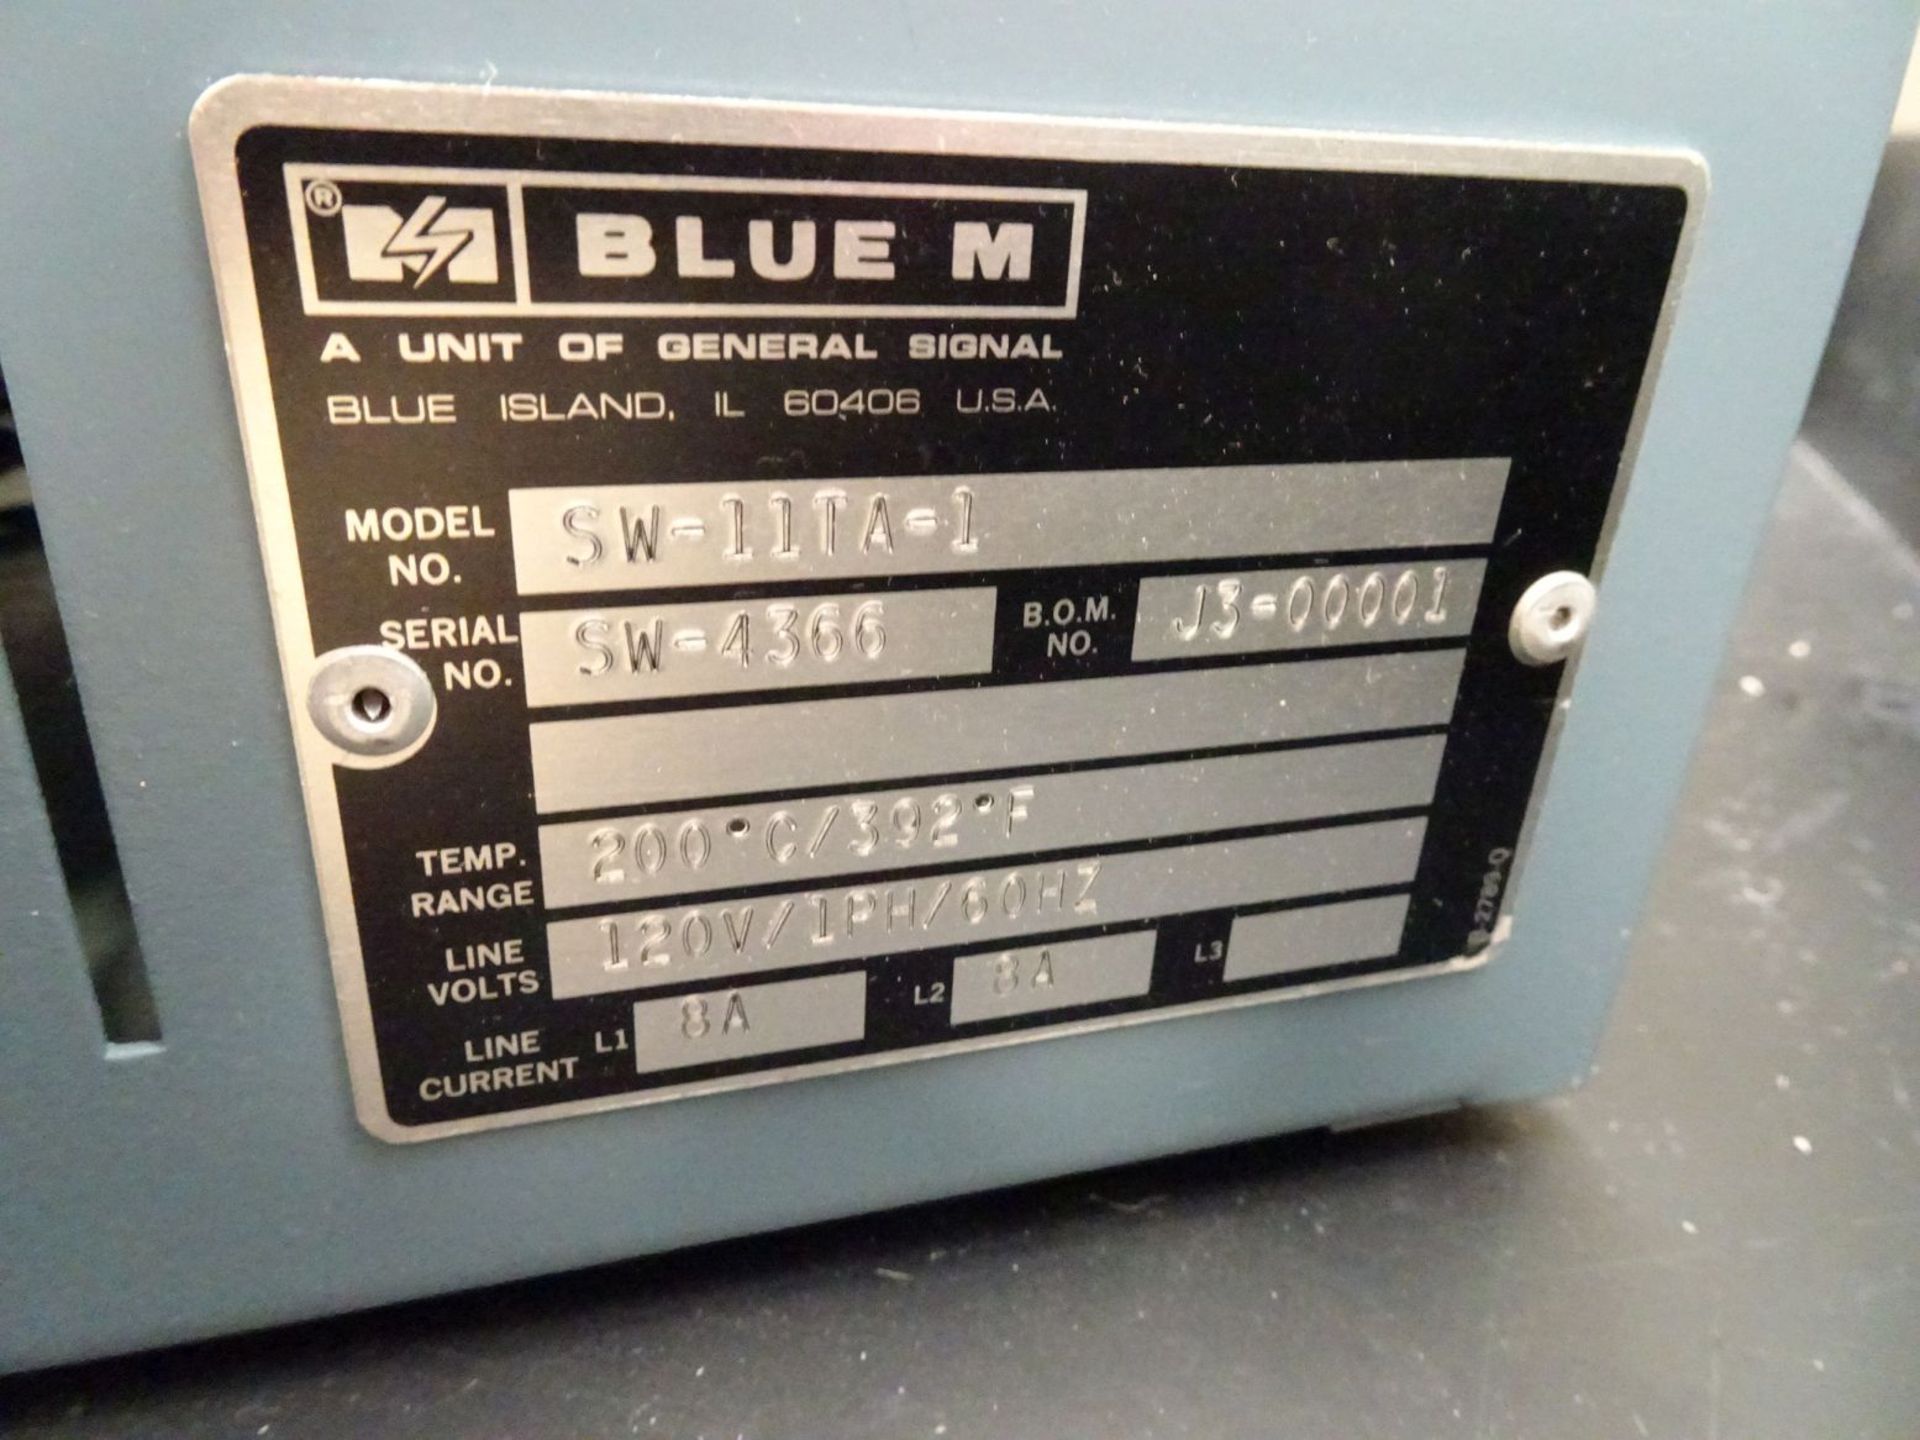 Blue M Model SW-11TA-1 Gravity Convection Oven - Image 5 of 5